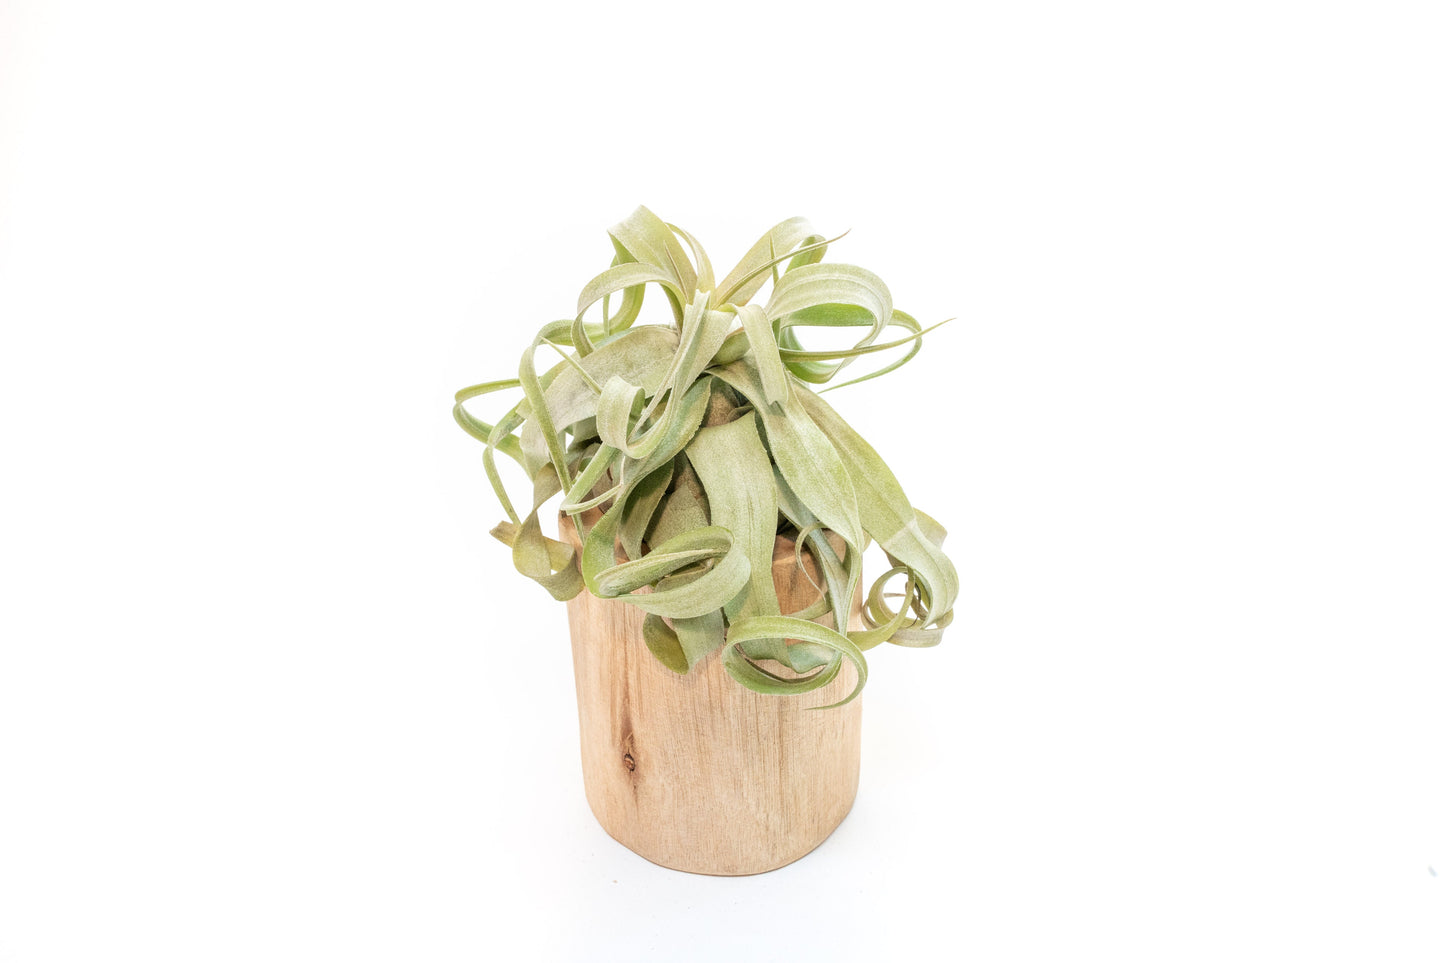 Large Driftwood Container - Choose Your Custom Tillandsia Air Plant